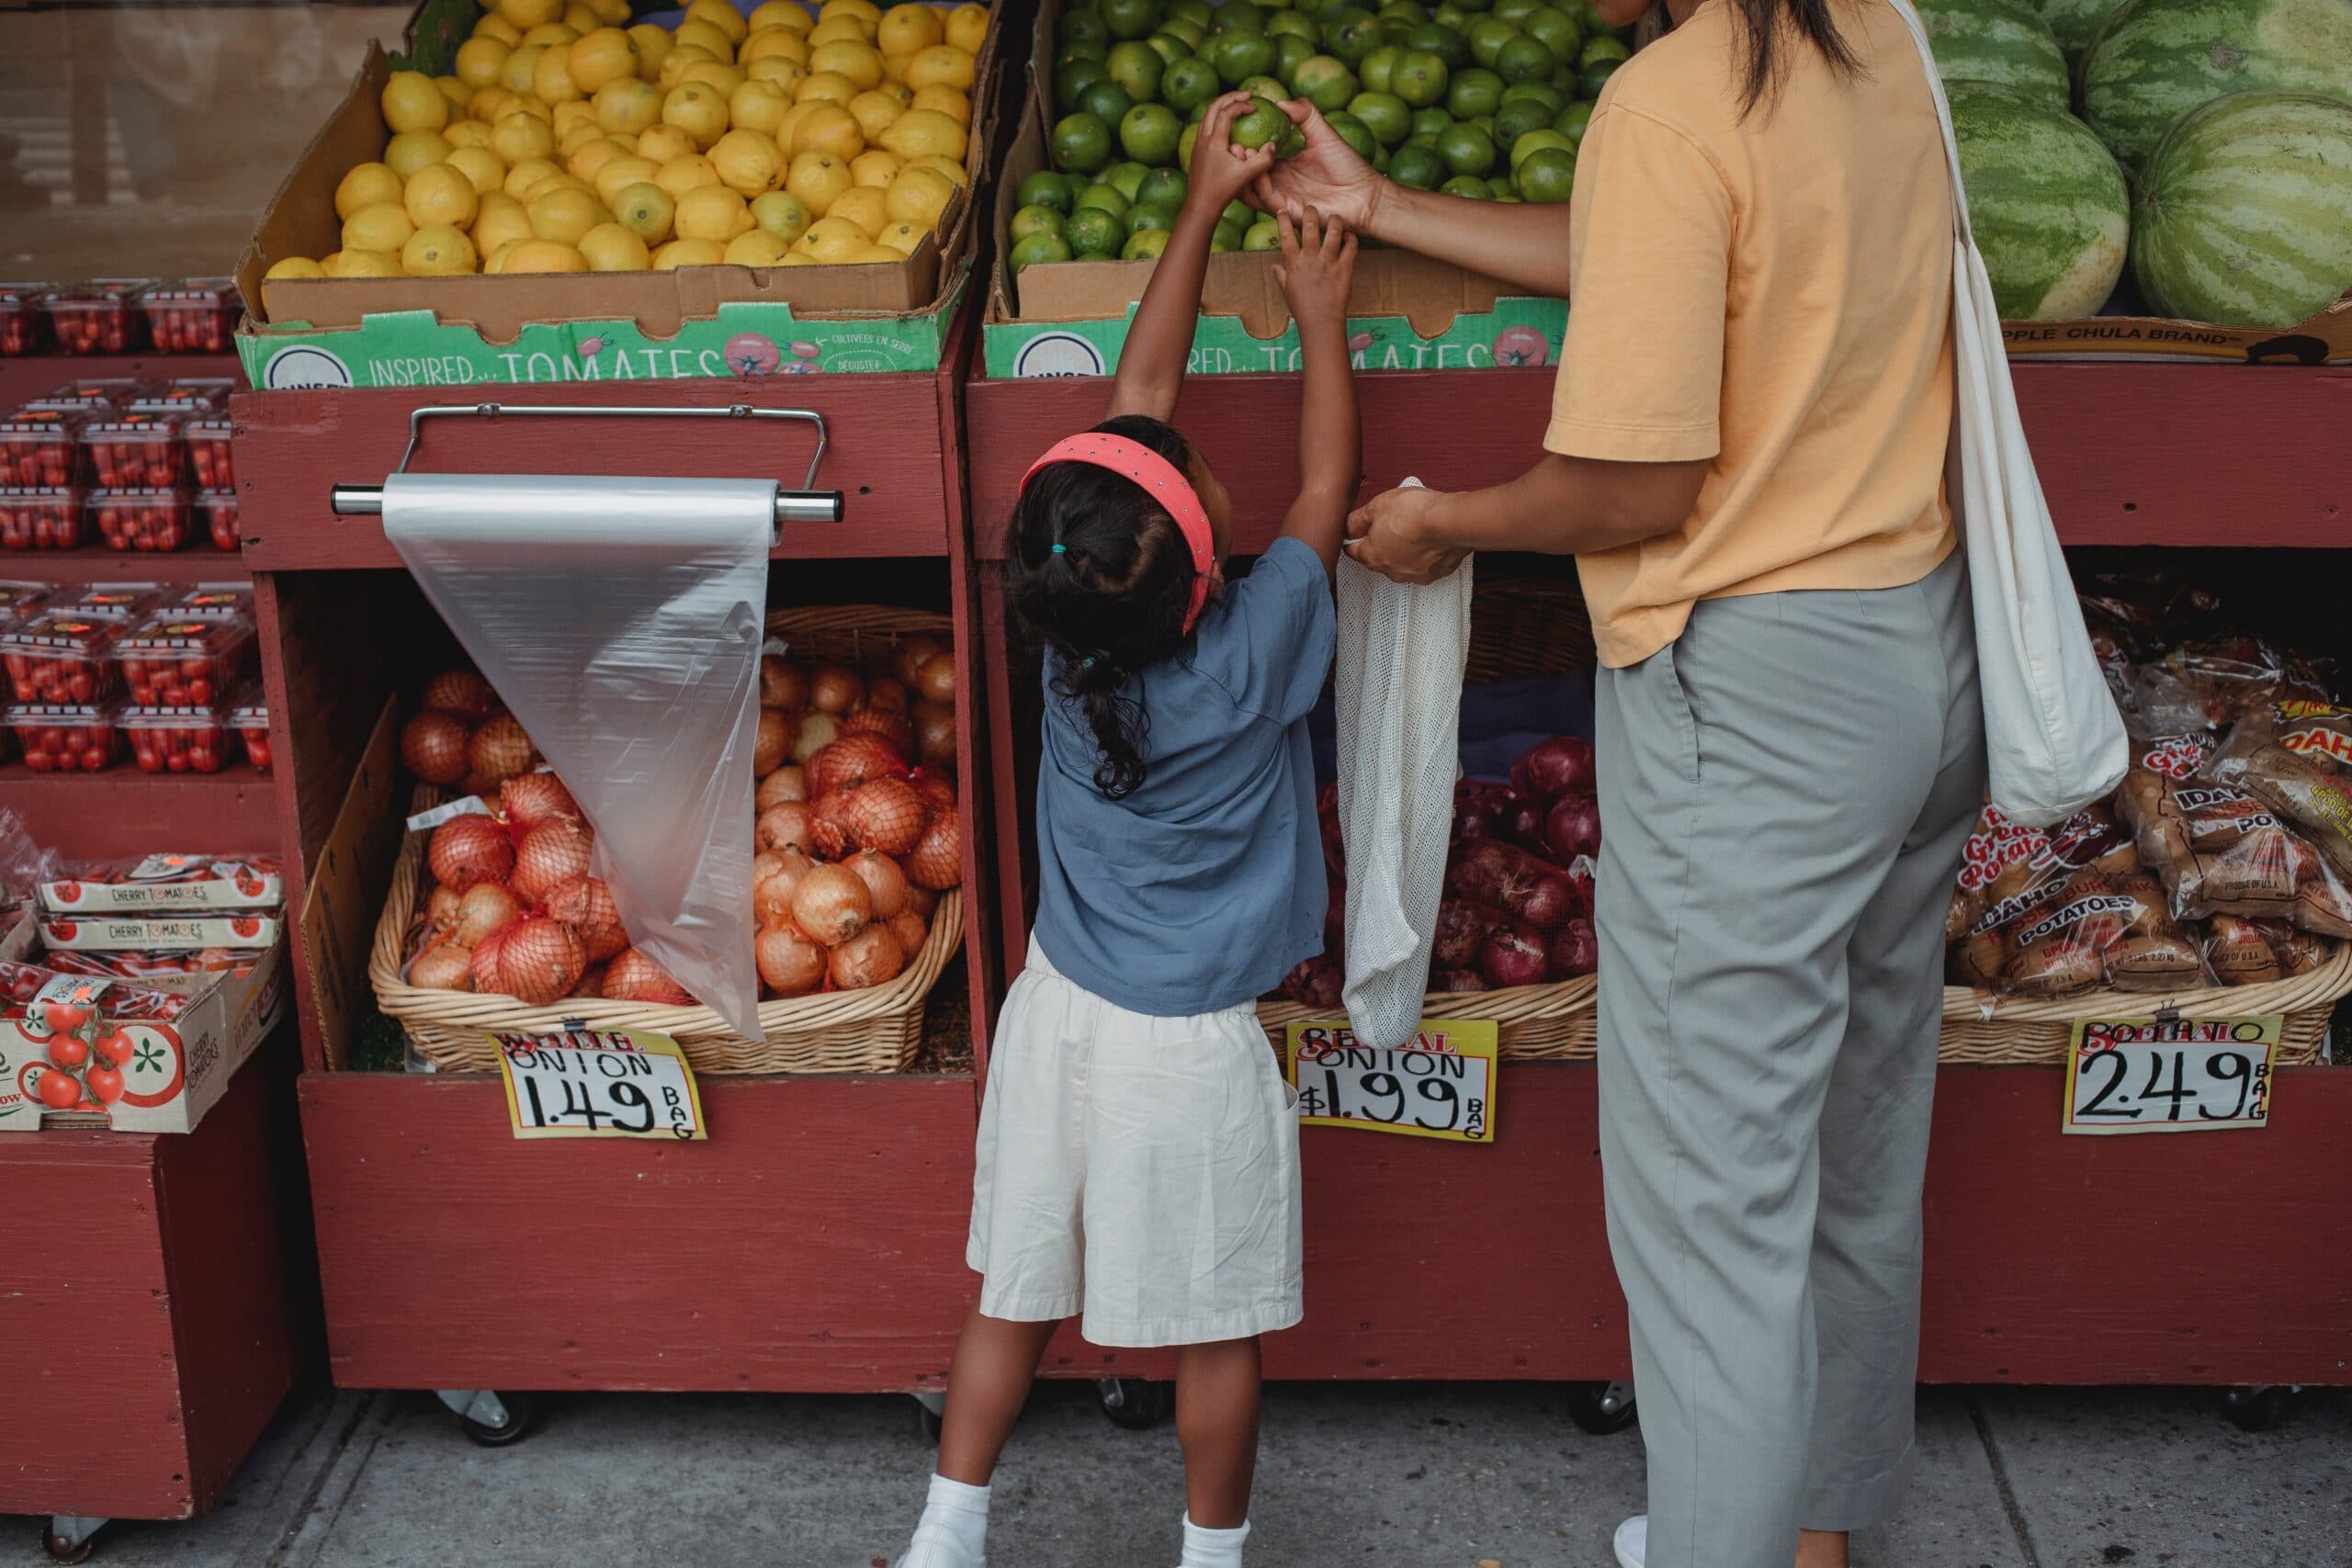 A mother and her daughter are choosing fruits